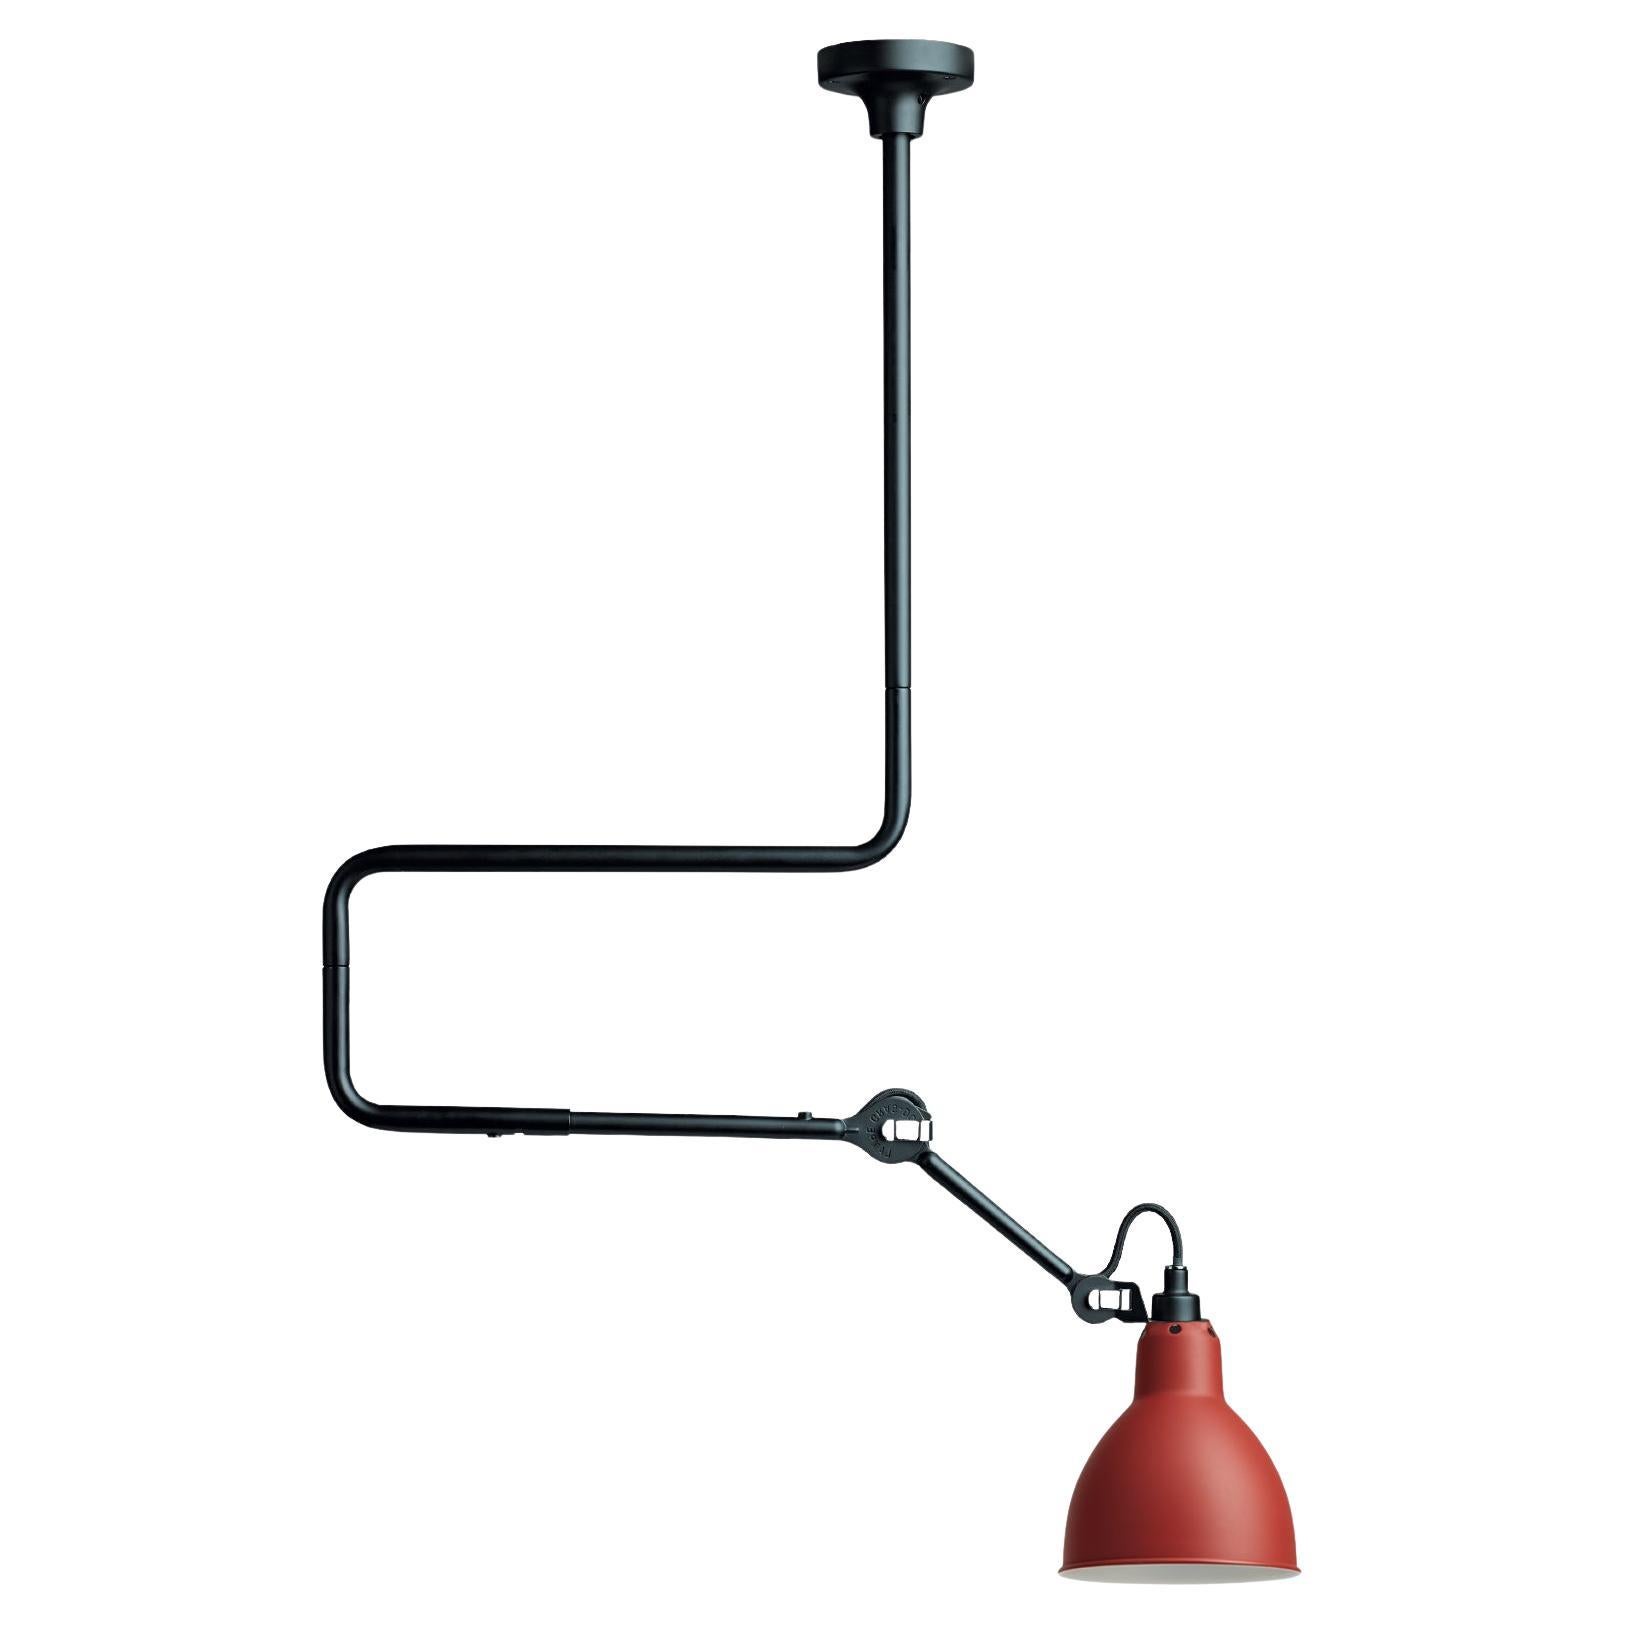 DCW Editions La Lampe Gras N°312 Pendant Lamp in Red Shade